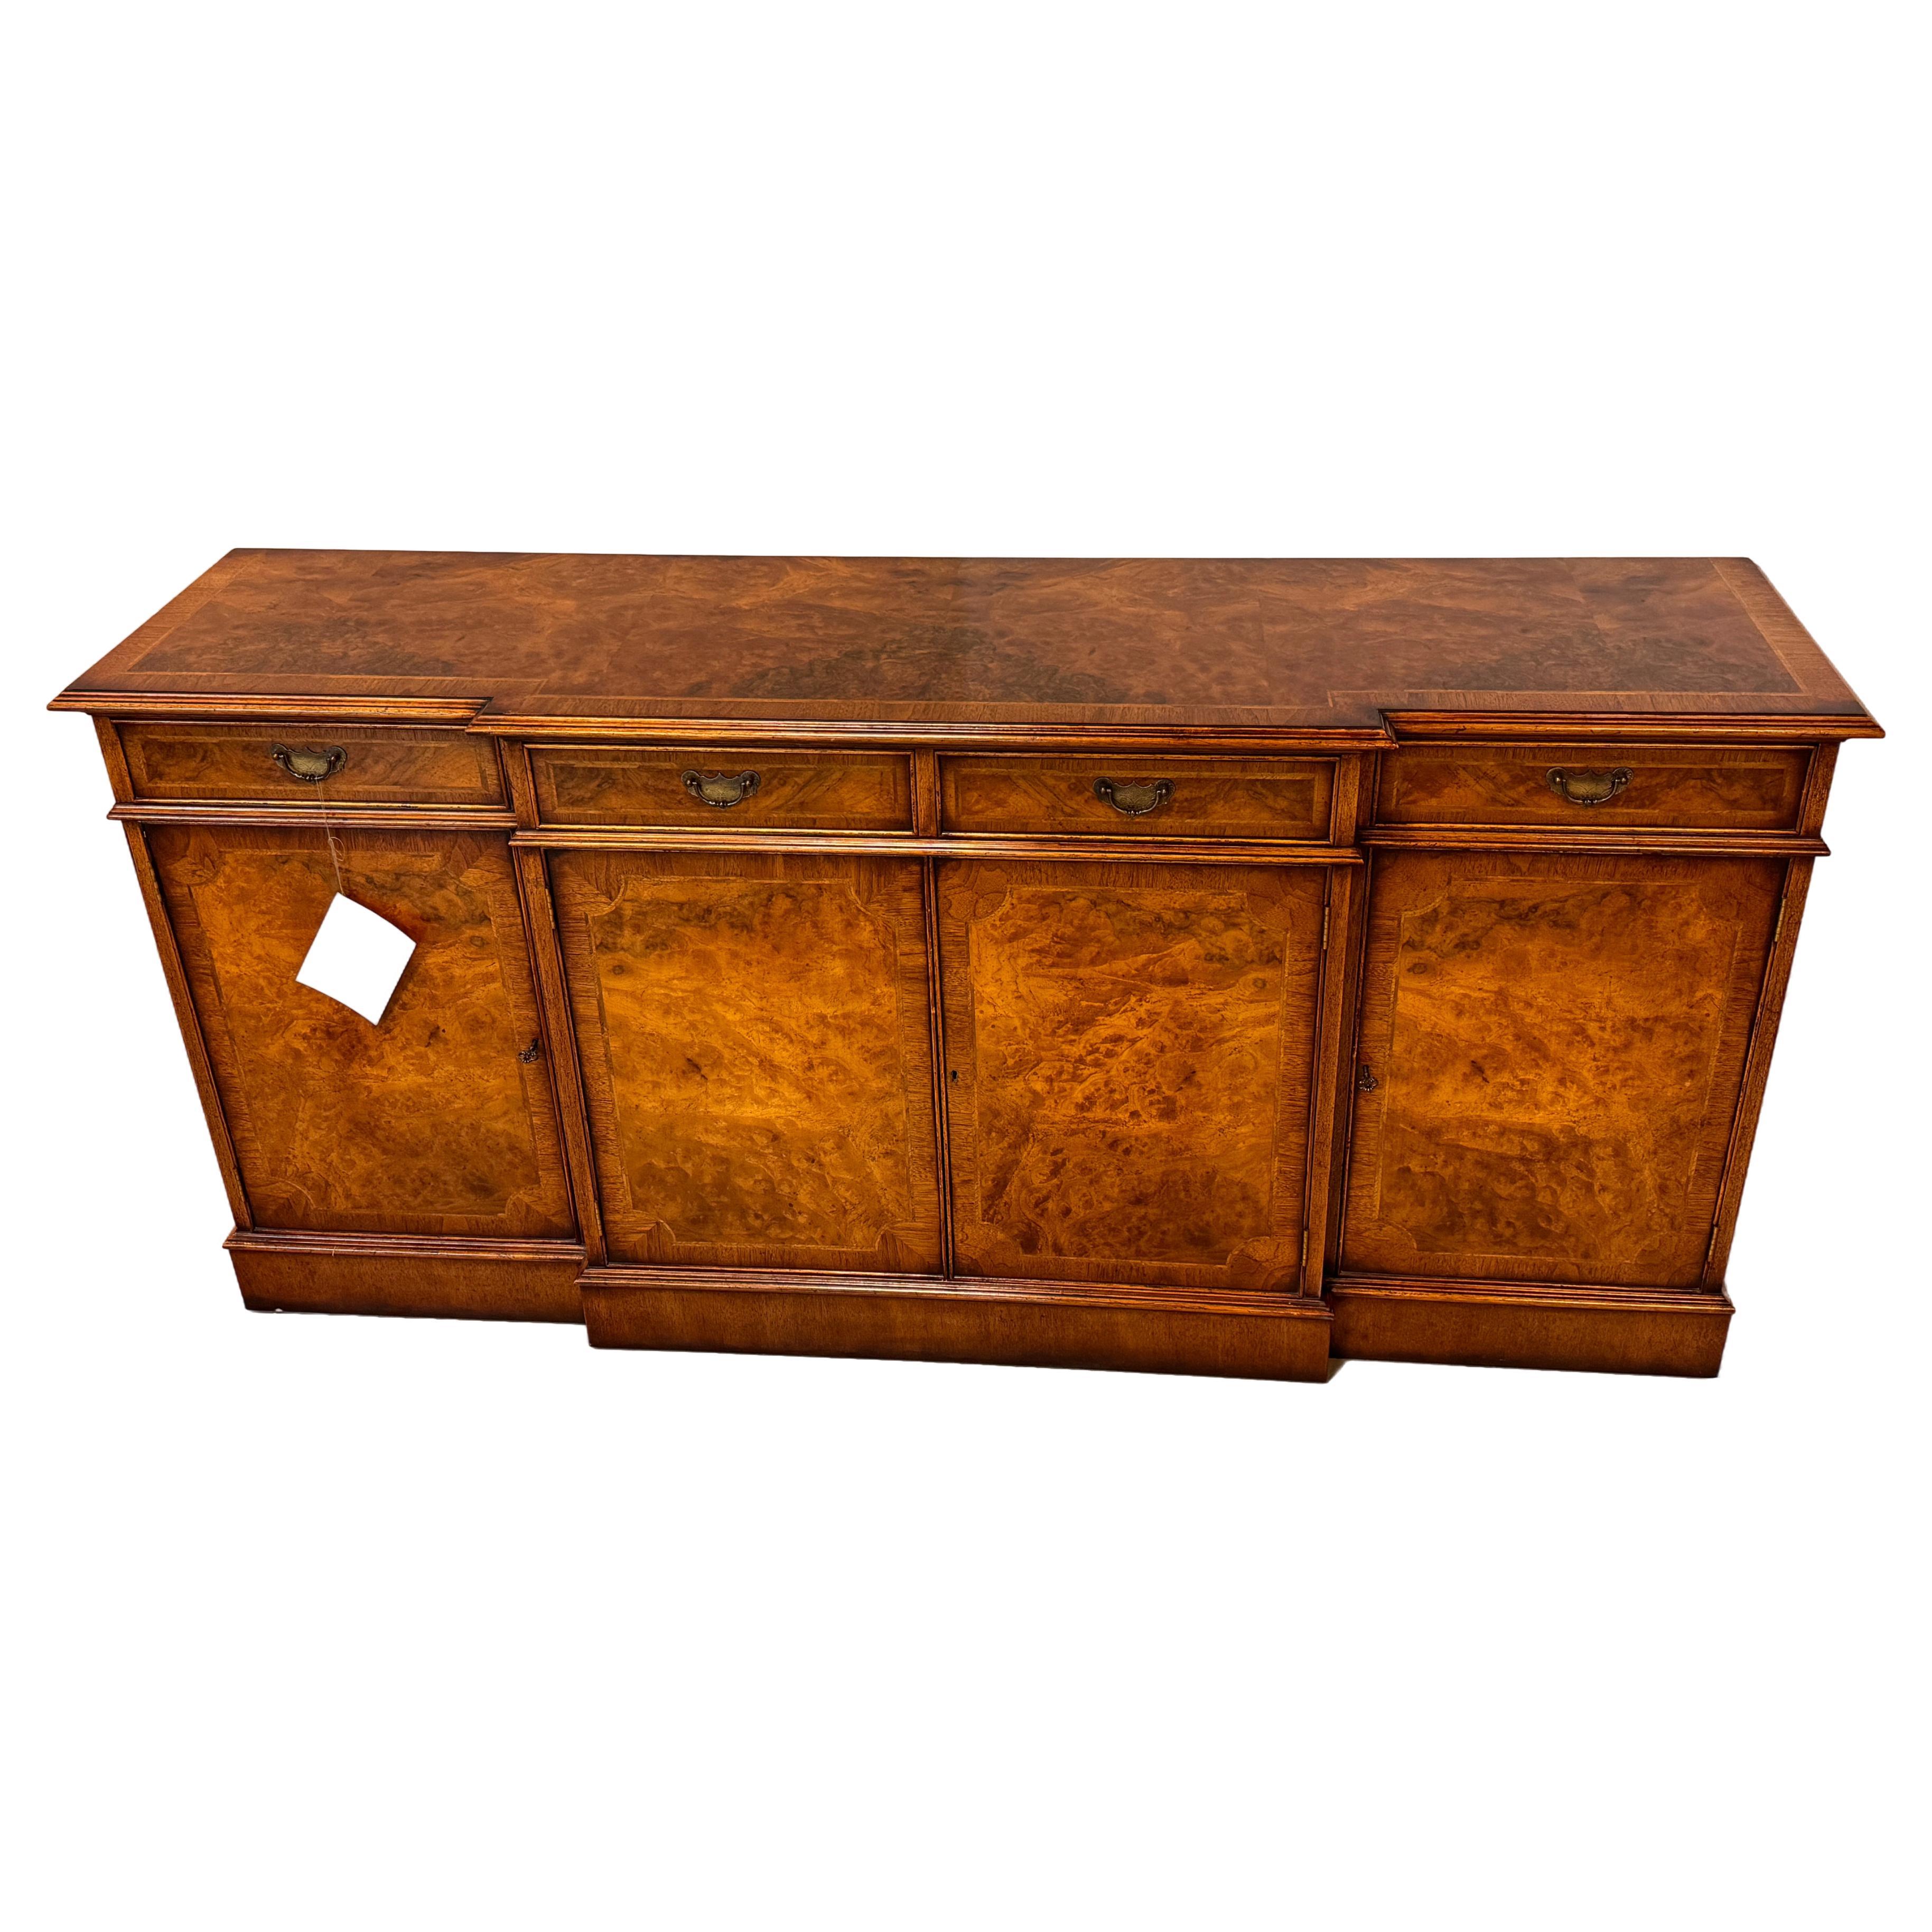 This stunning 18th Century Style Buffet Sideboard in Walnut Burr which is a prized wood known for its beautifully richly grained pattern is a magnificent piece of furniture.  Not only is it gorgeous, but it is also practical with ample space for